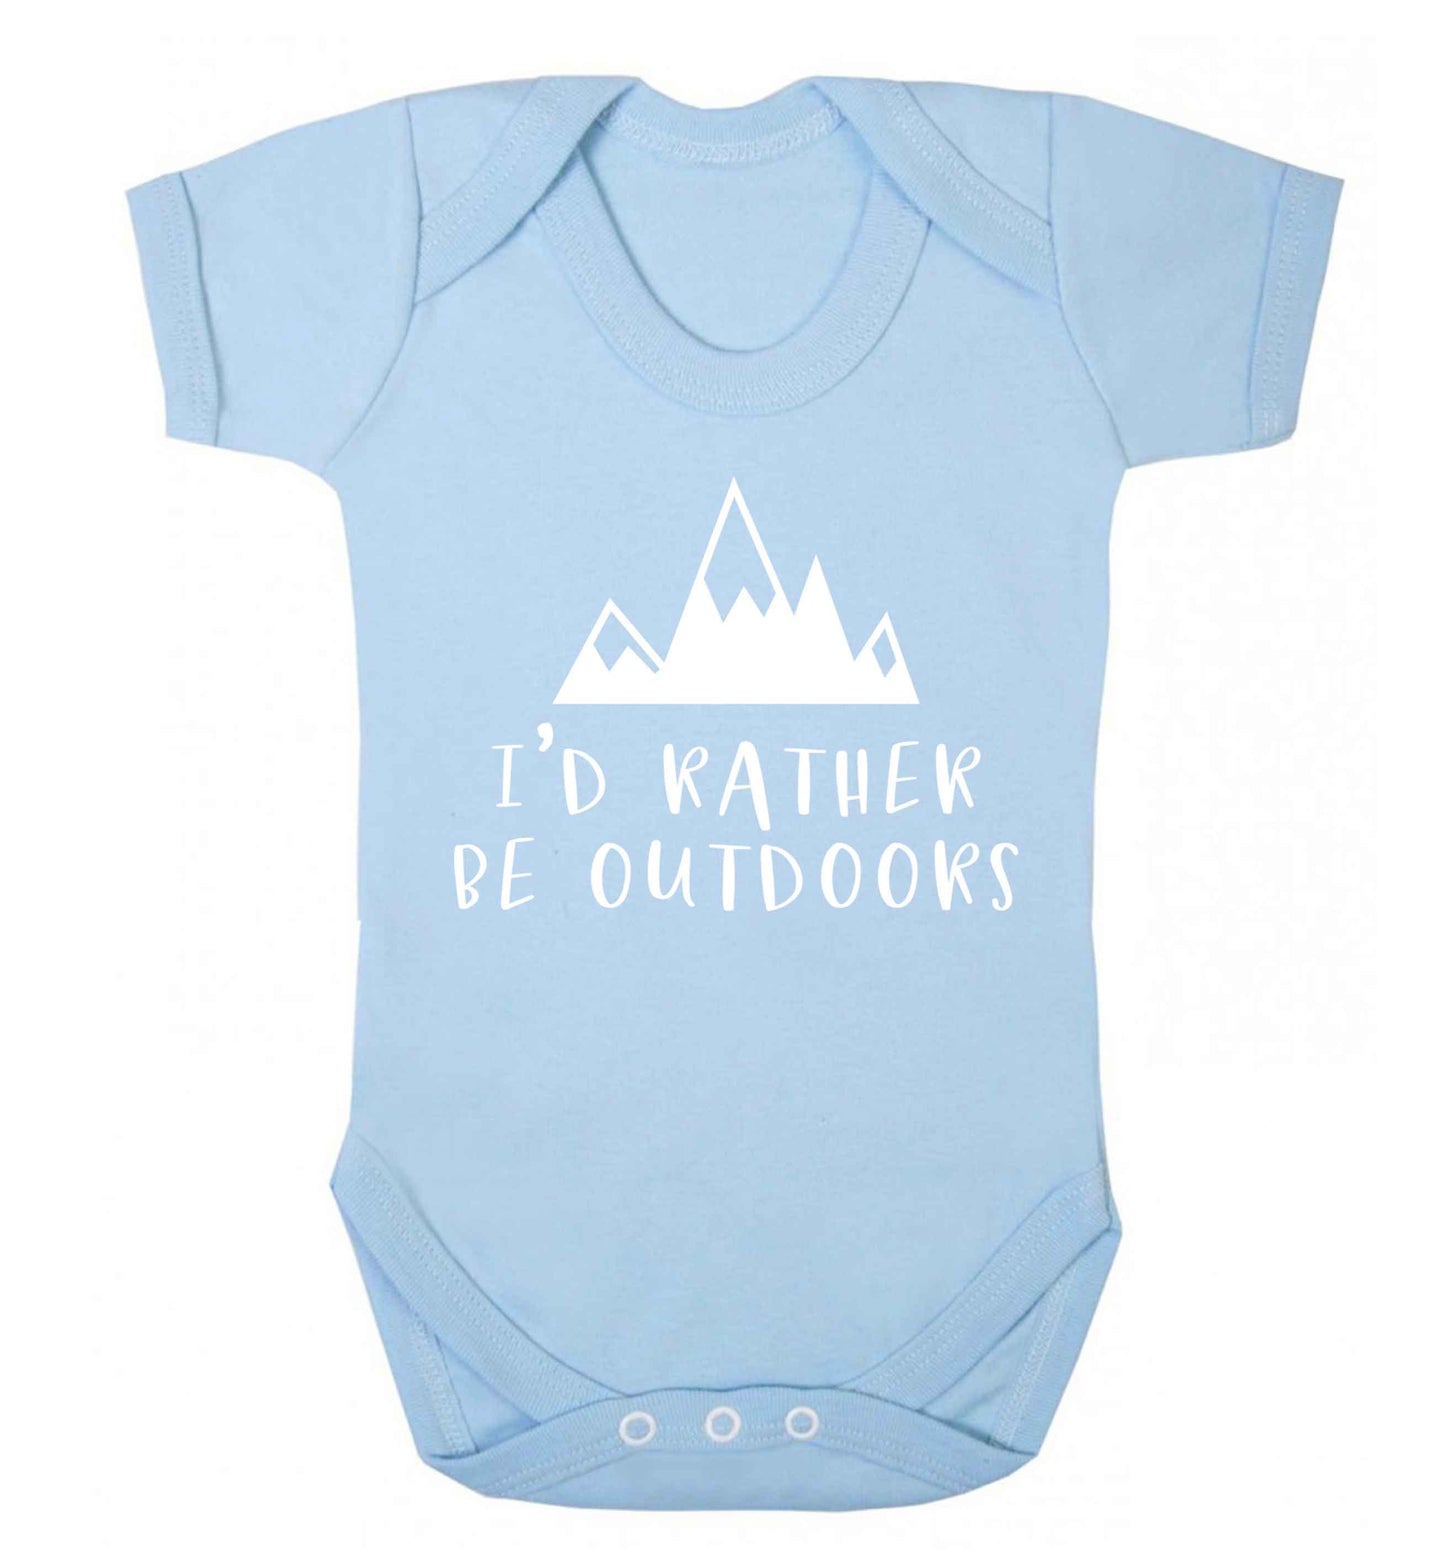 I'd rather be outdoors Baby Vest pale blue 18-24 months